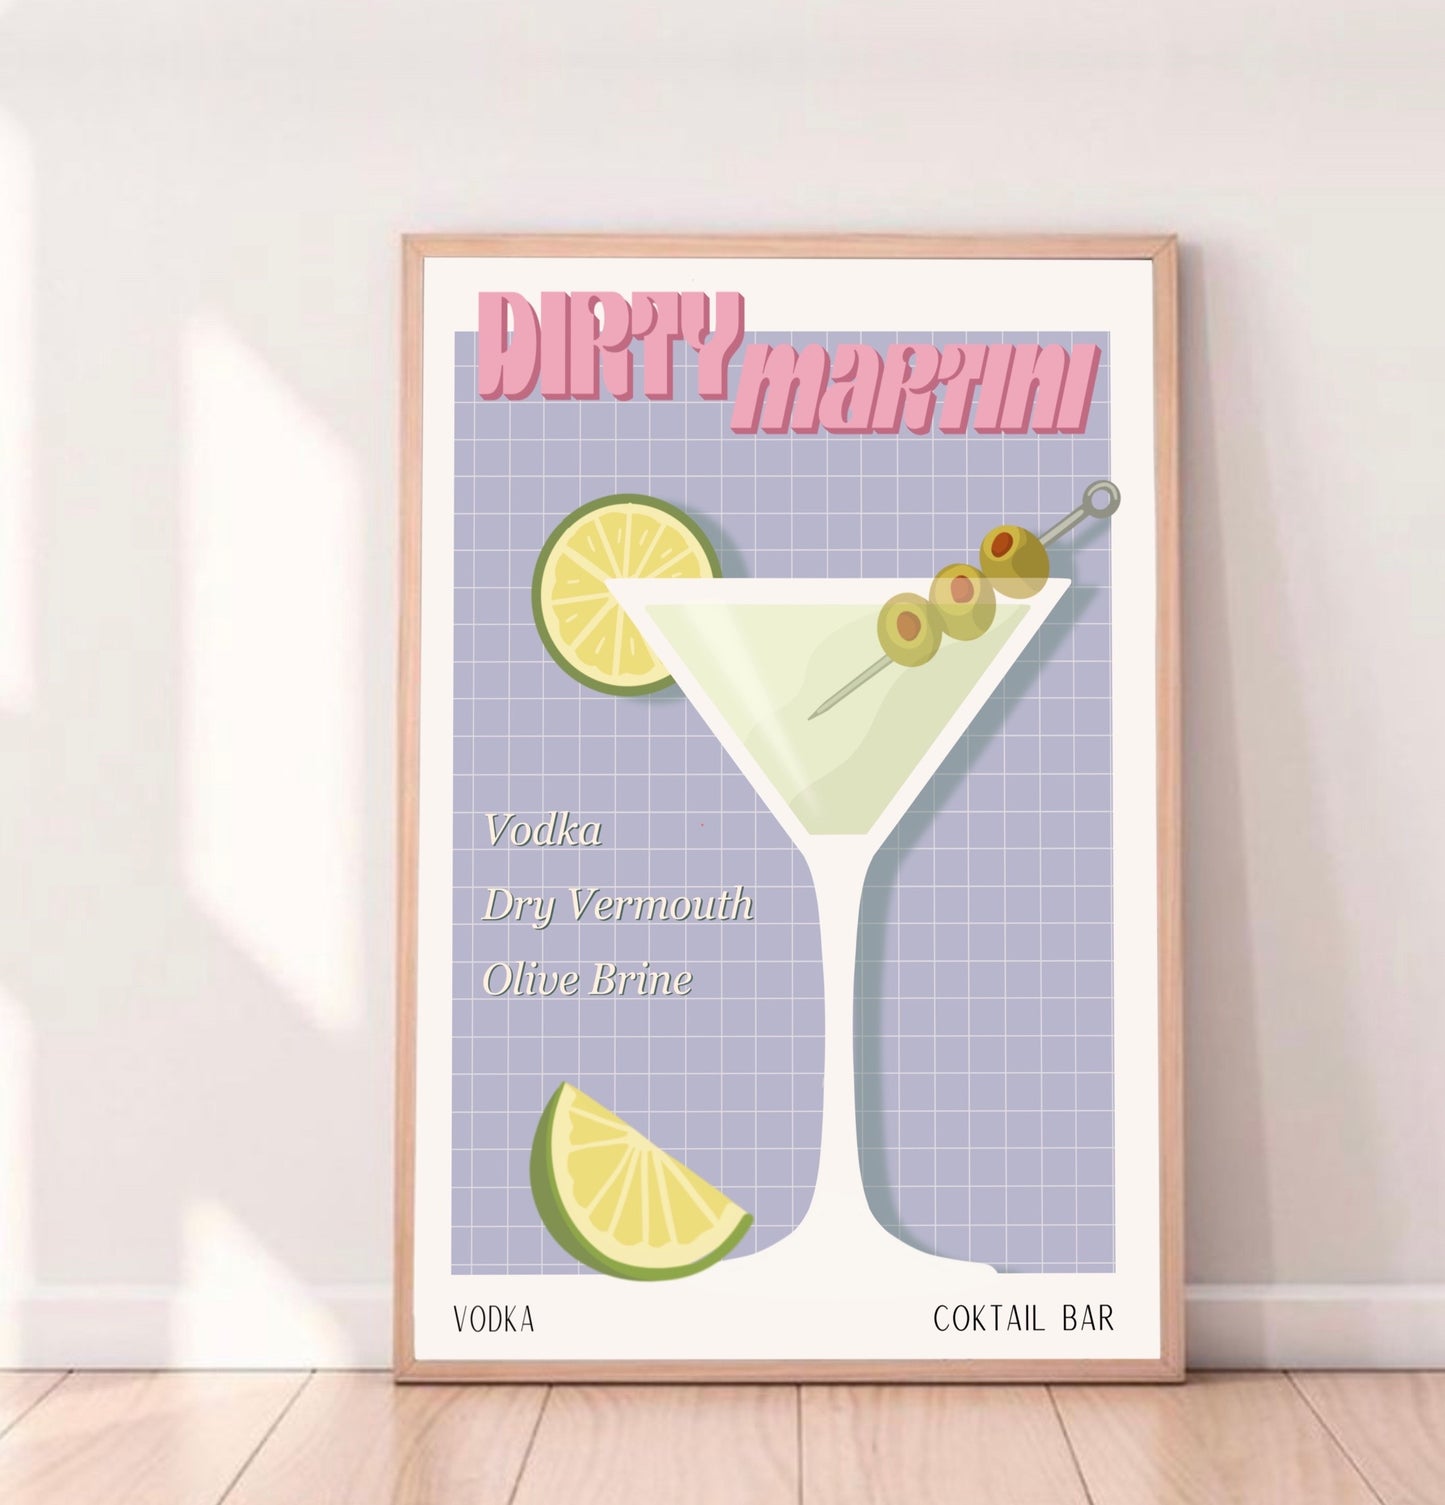 DIRTY MARTINI PRINT - Bar Poster - Wall Decoration - Cocktail Poster - Interior Decoration